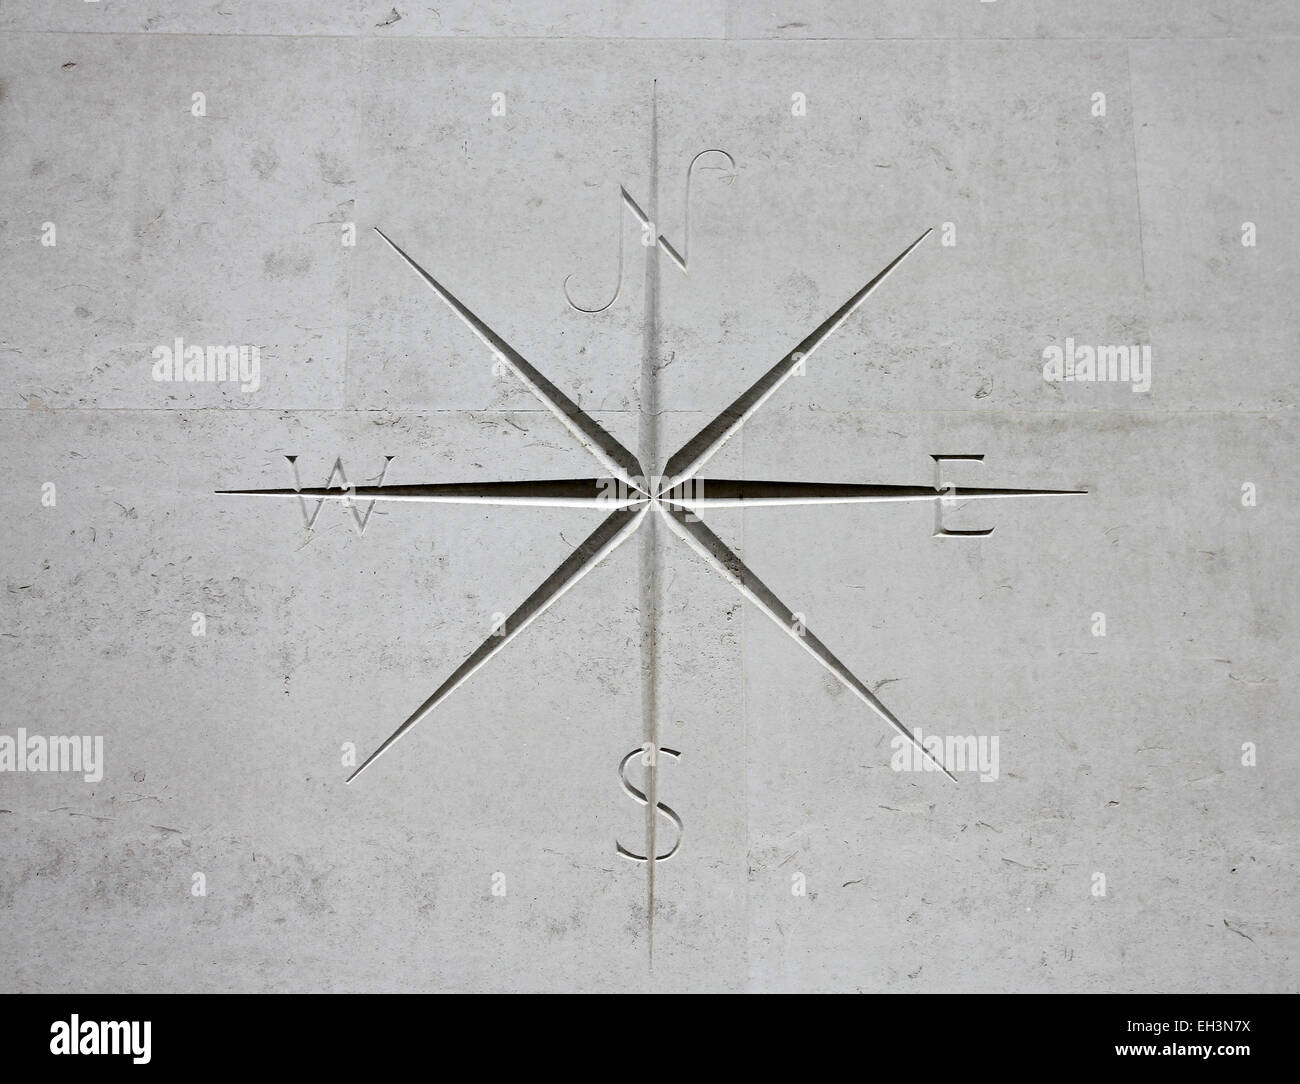 compass points on building wall Stock Photo